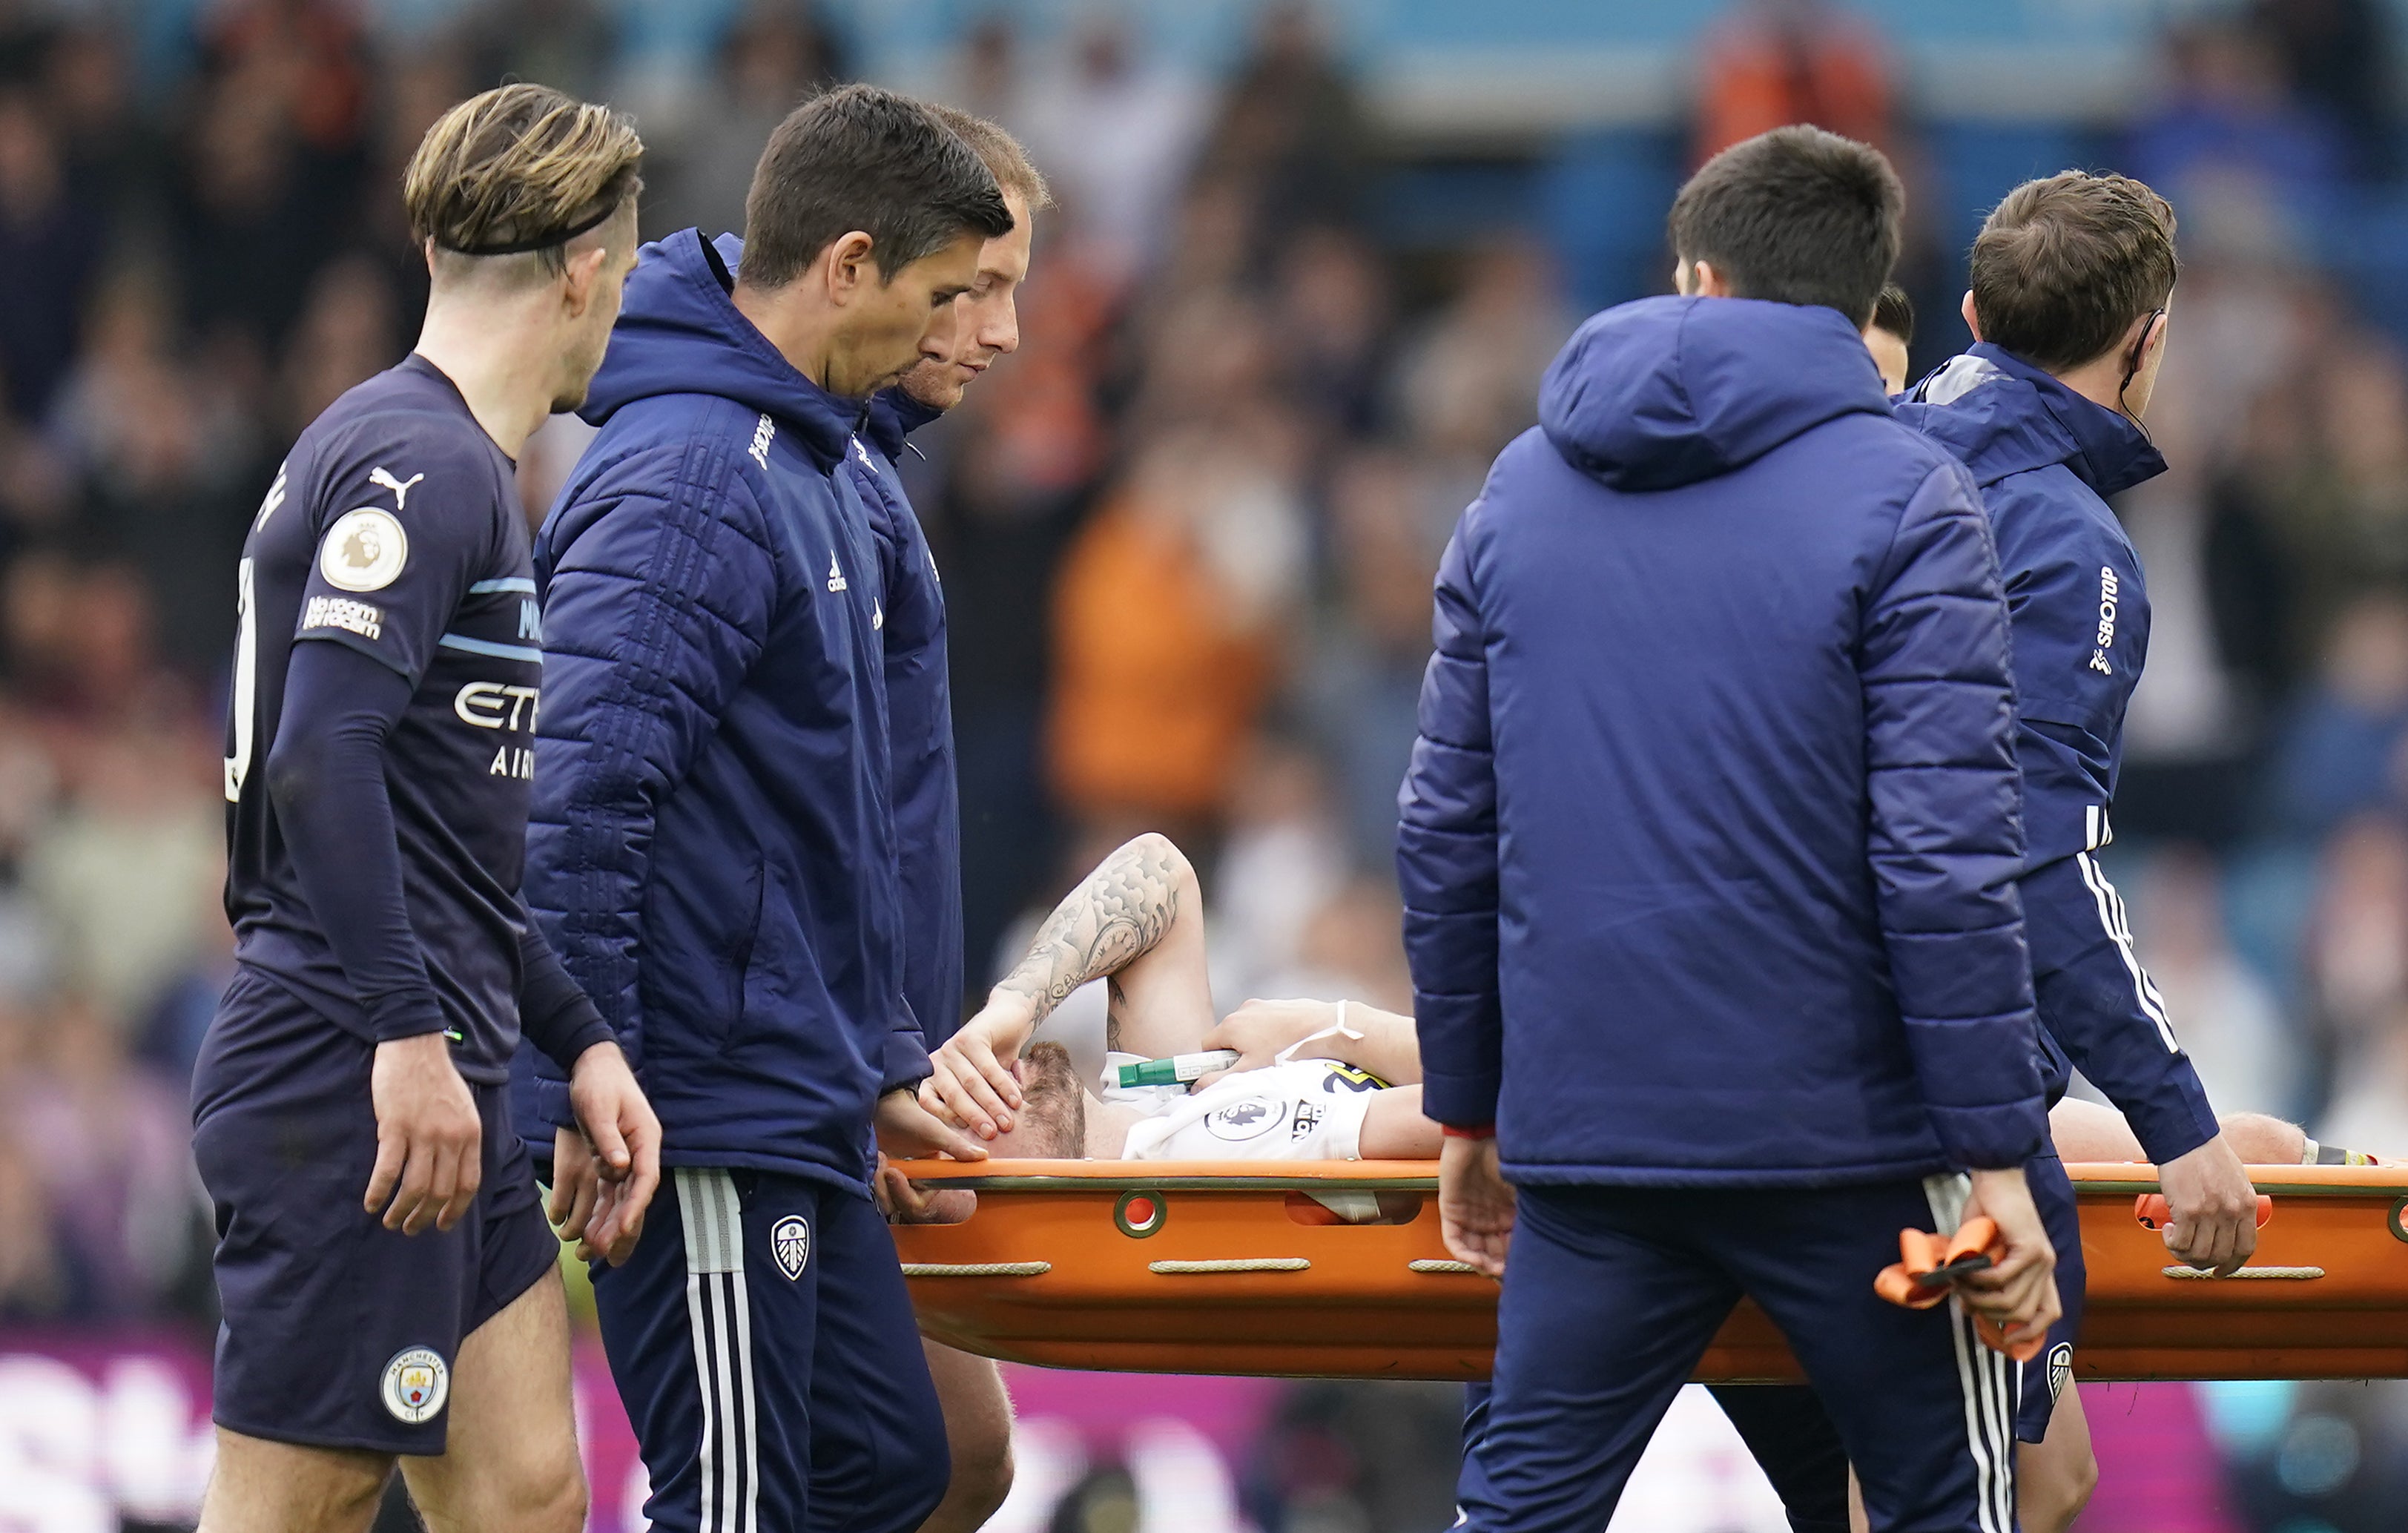 Leeds’ Stuart Dallas is taken off on a stretcher after breaking his leg against Manchester City (Danny Lawson/PA)